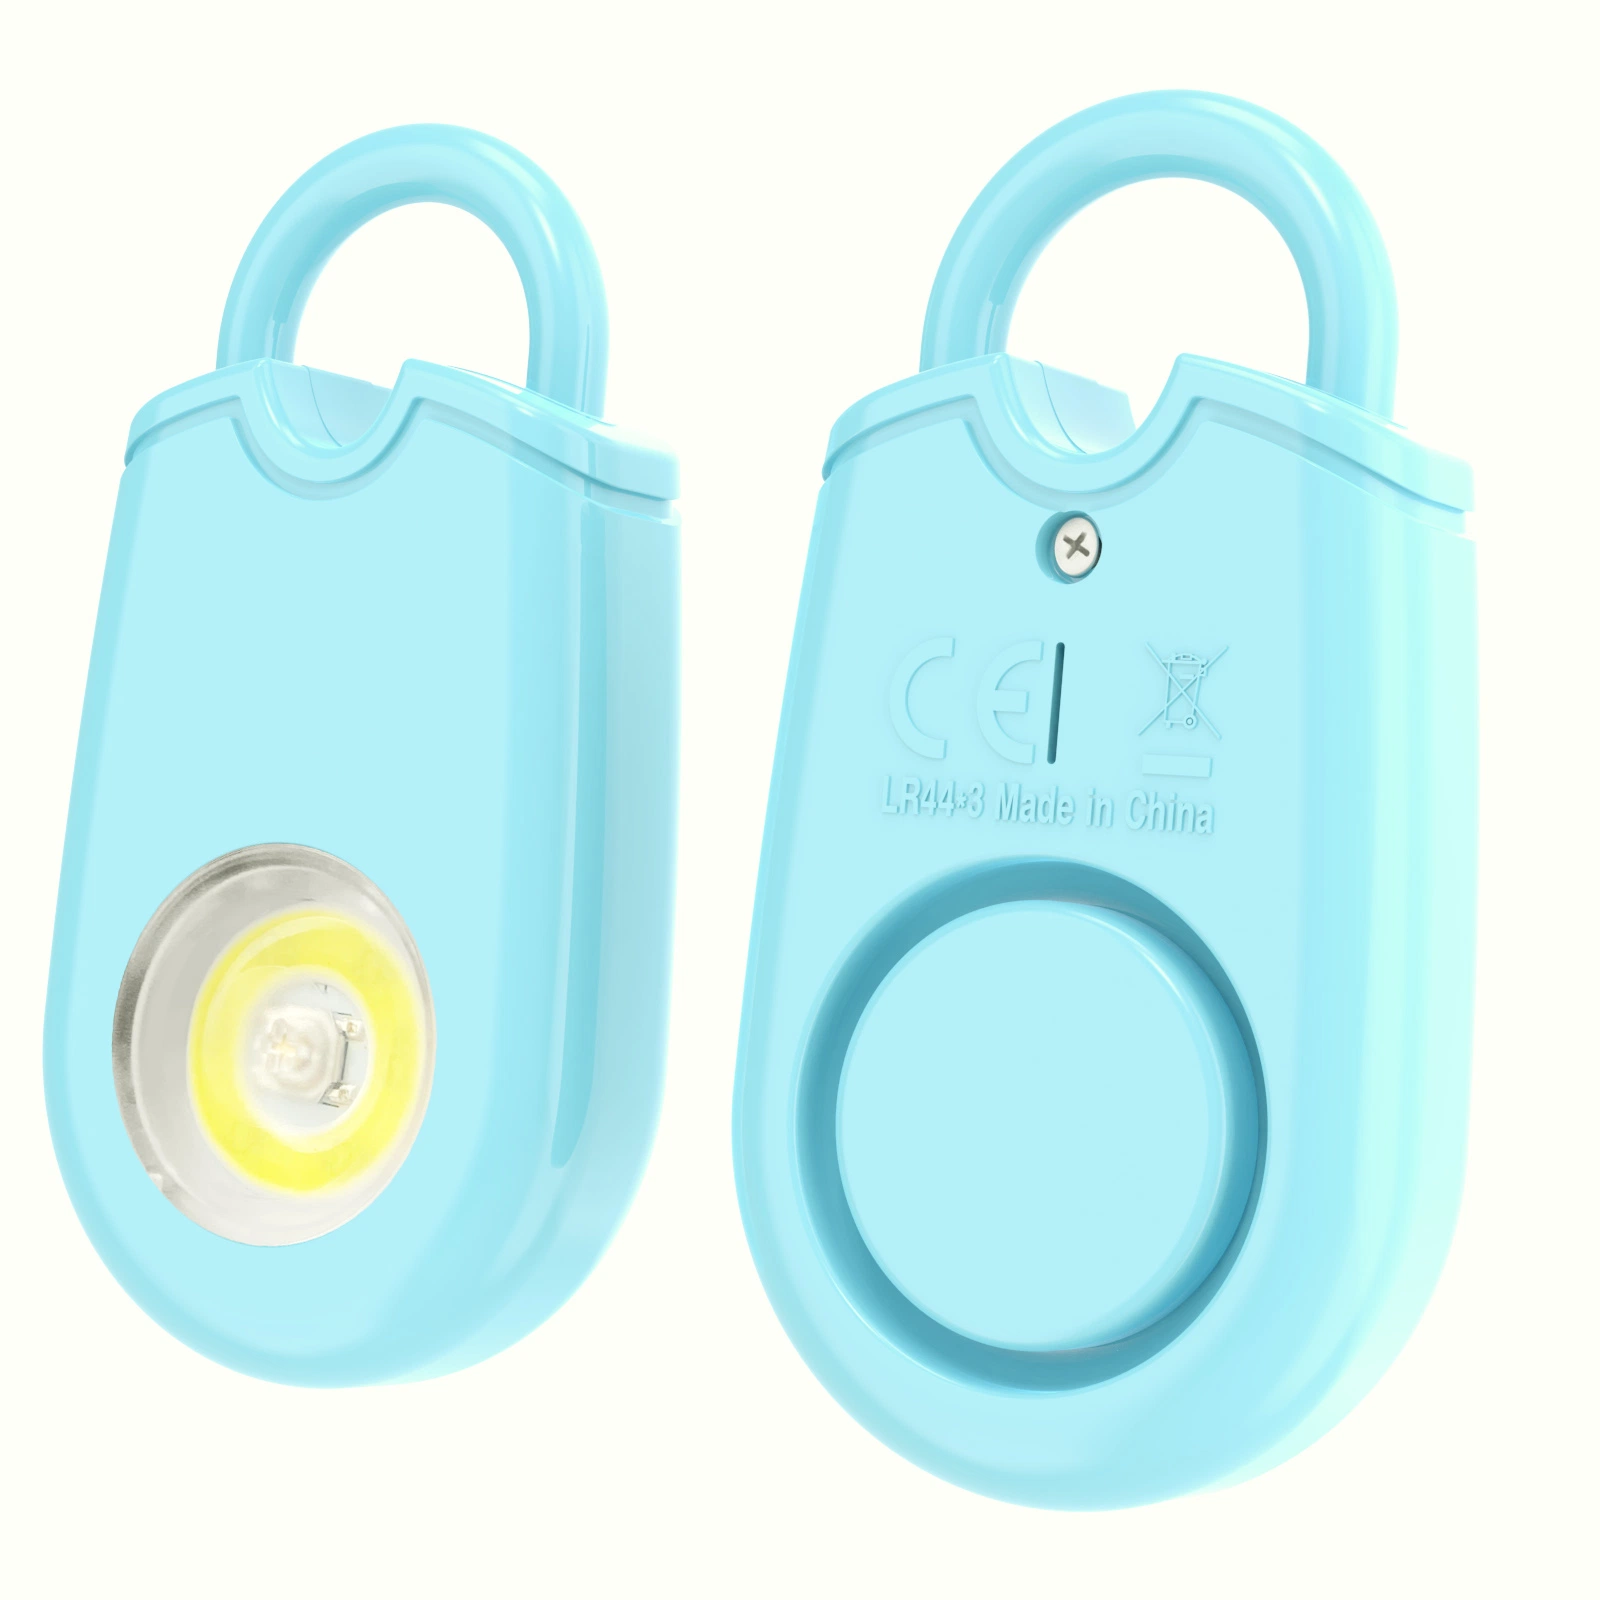 Promotion Gift Mini Personal Emergency Alarm with LED Light